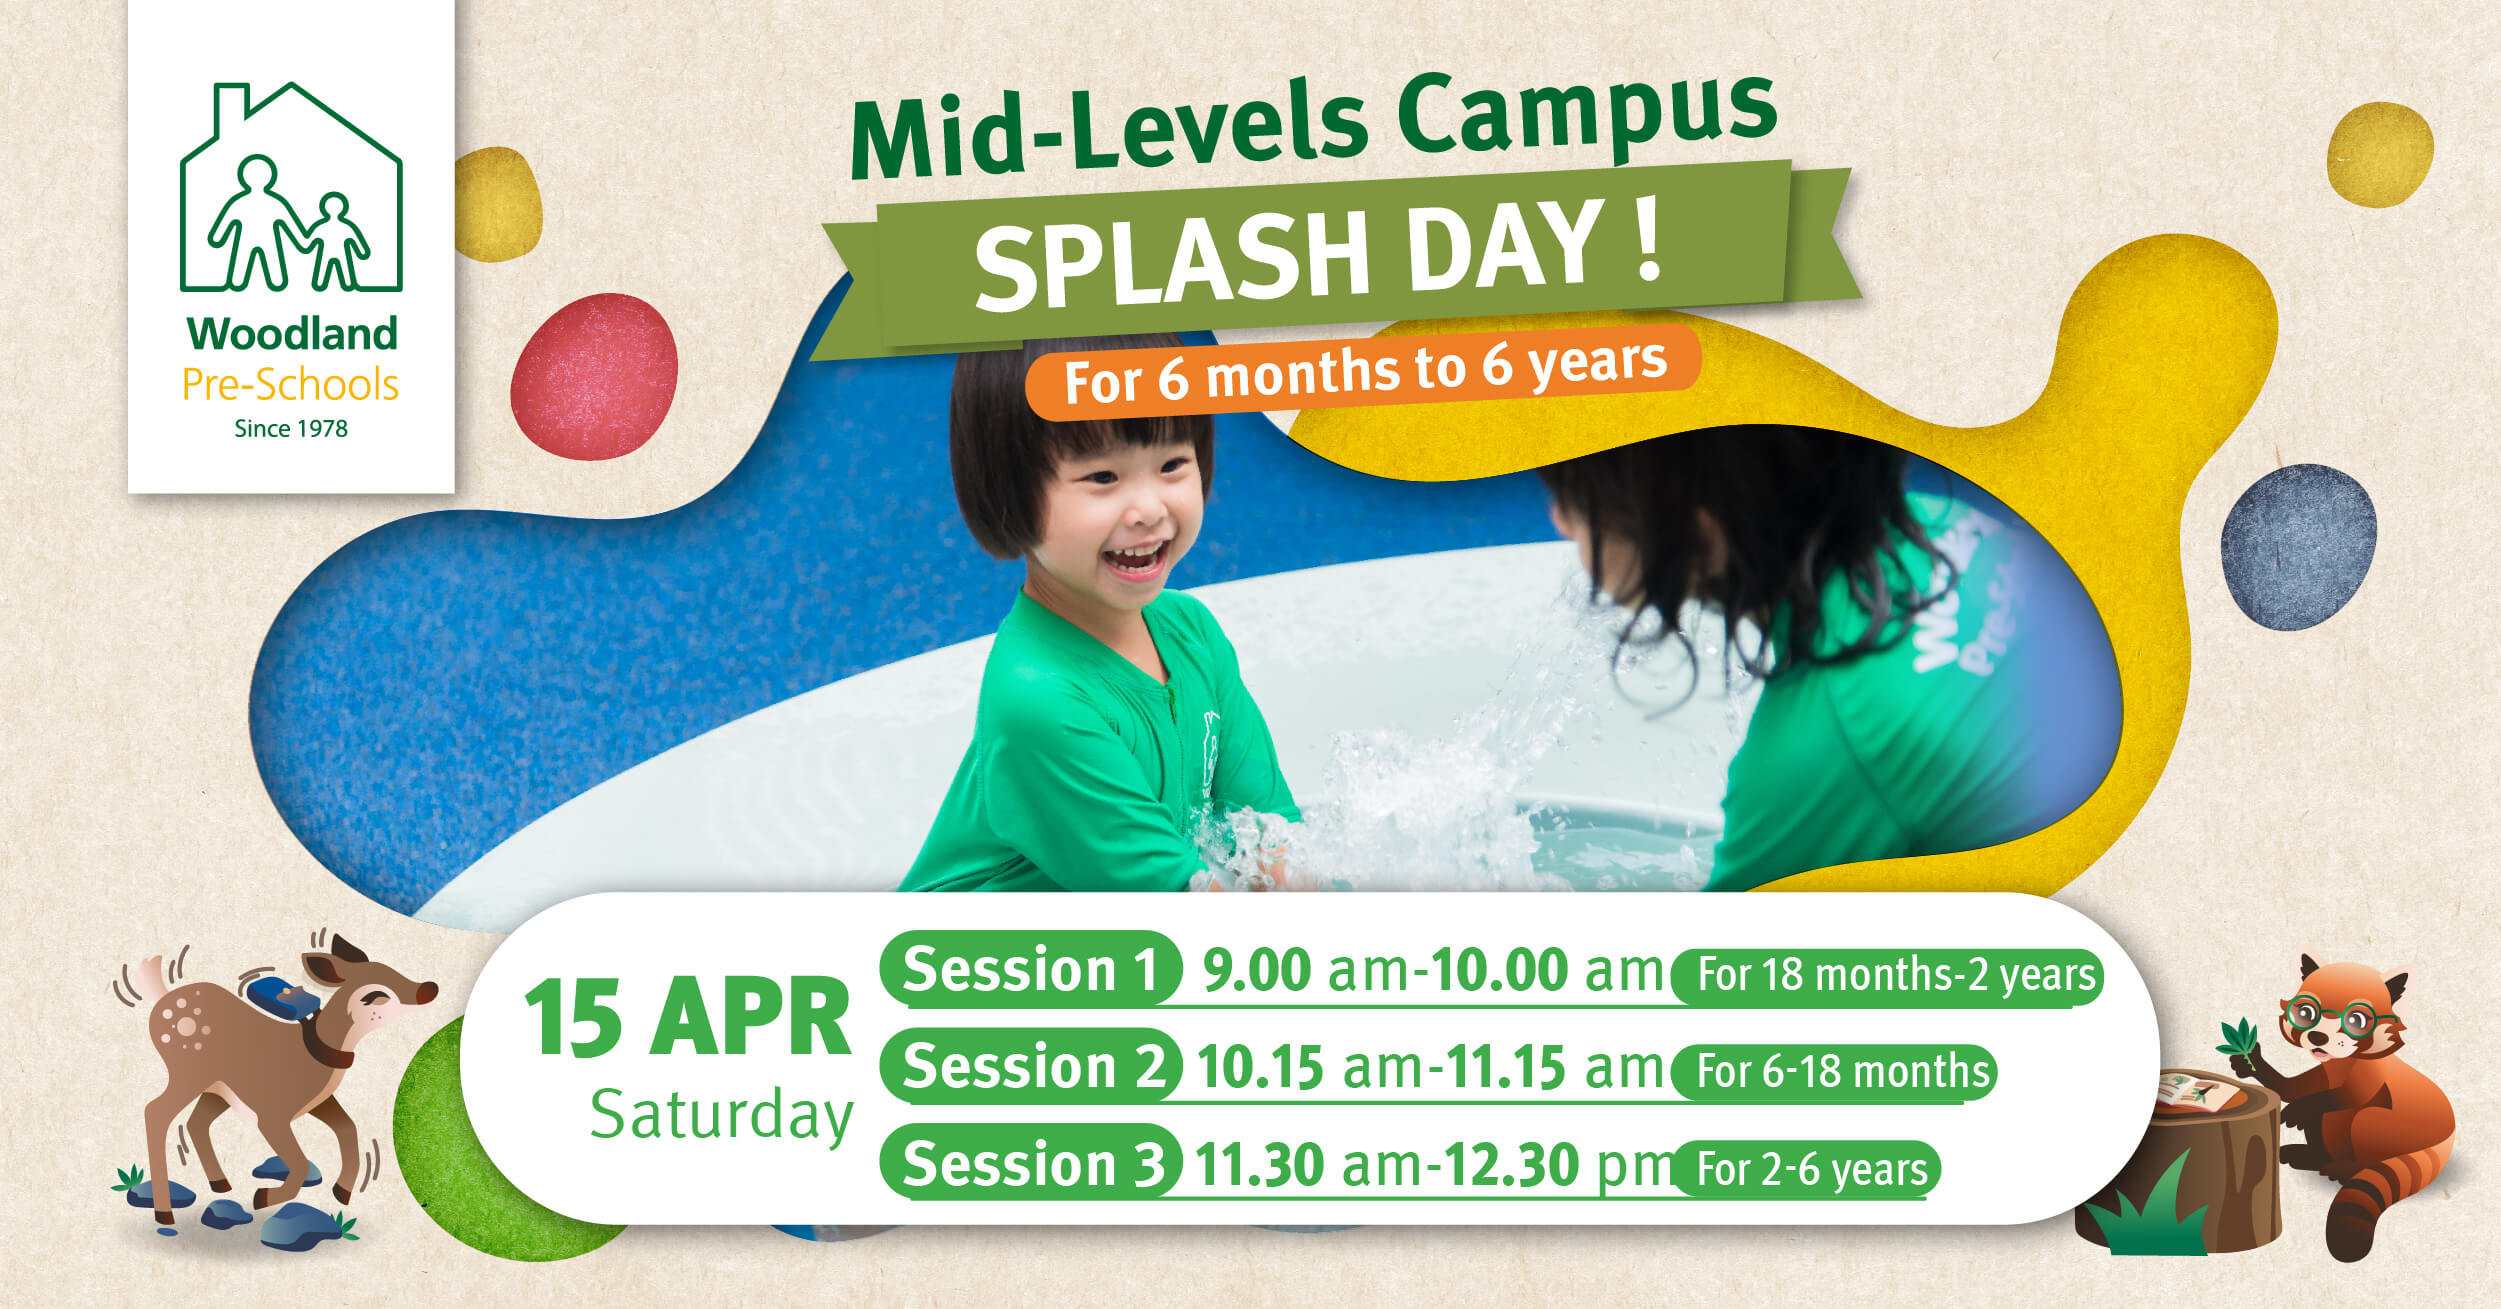 Mid-Levels campus hosting a fun splash day for children 6 months to 6 years